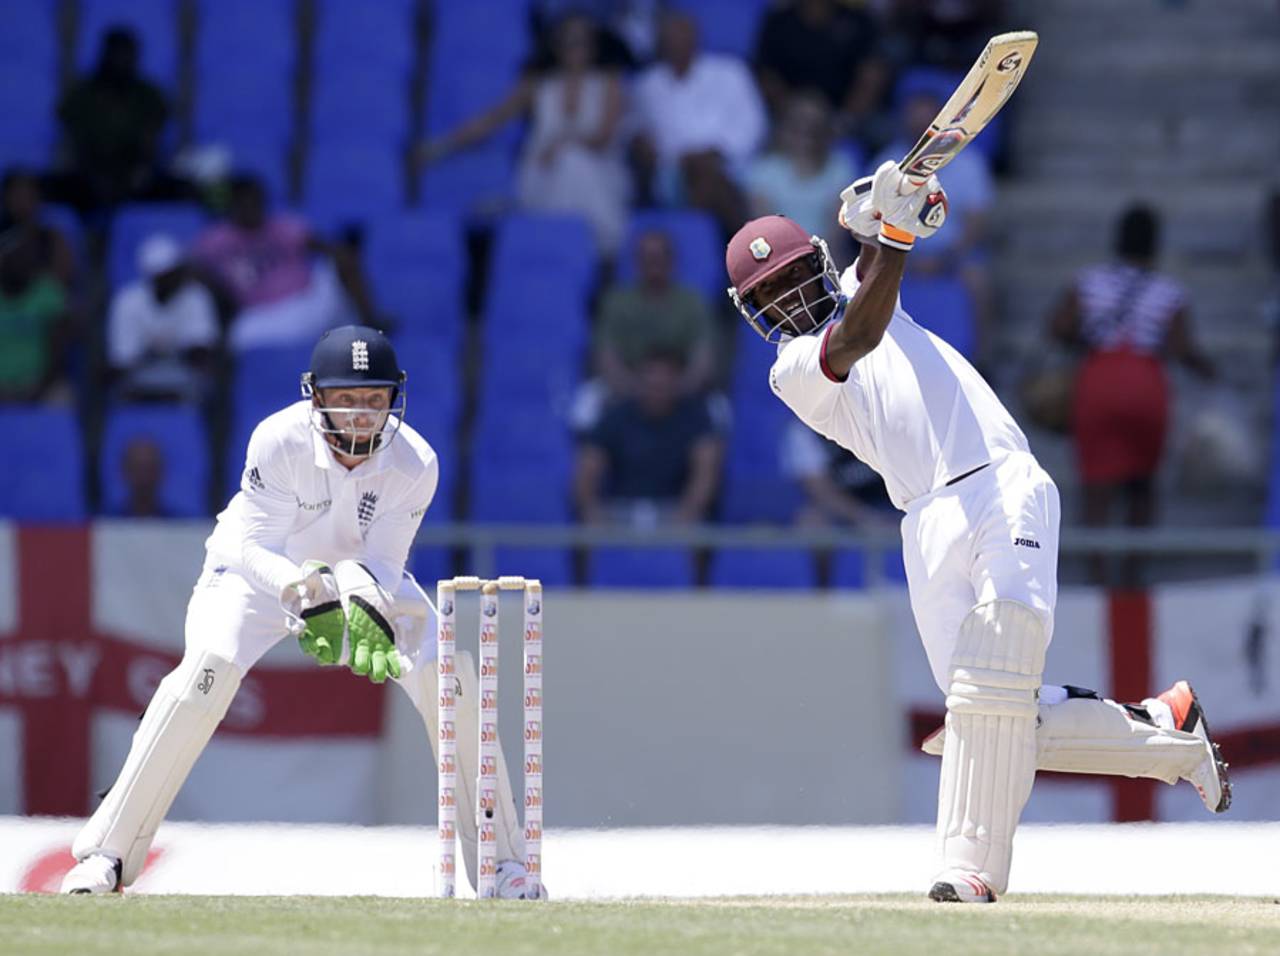 Jermaine Blackwood mixed attacking strokes in with resolute defence for reach his maiden hundred&nbsp;&nbsp;&bull;&nbsp;&nbsp;Associated Press